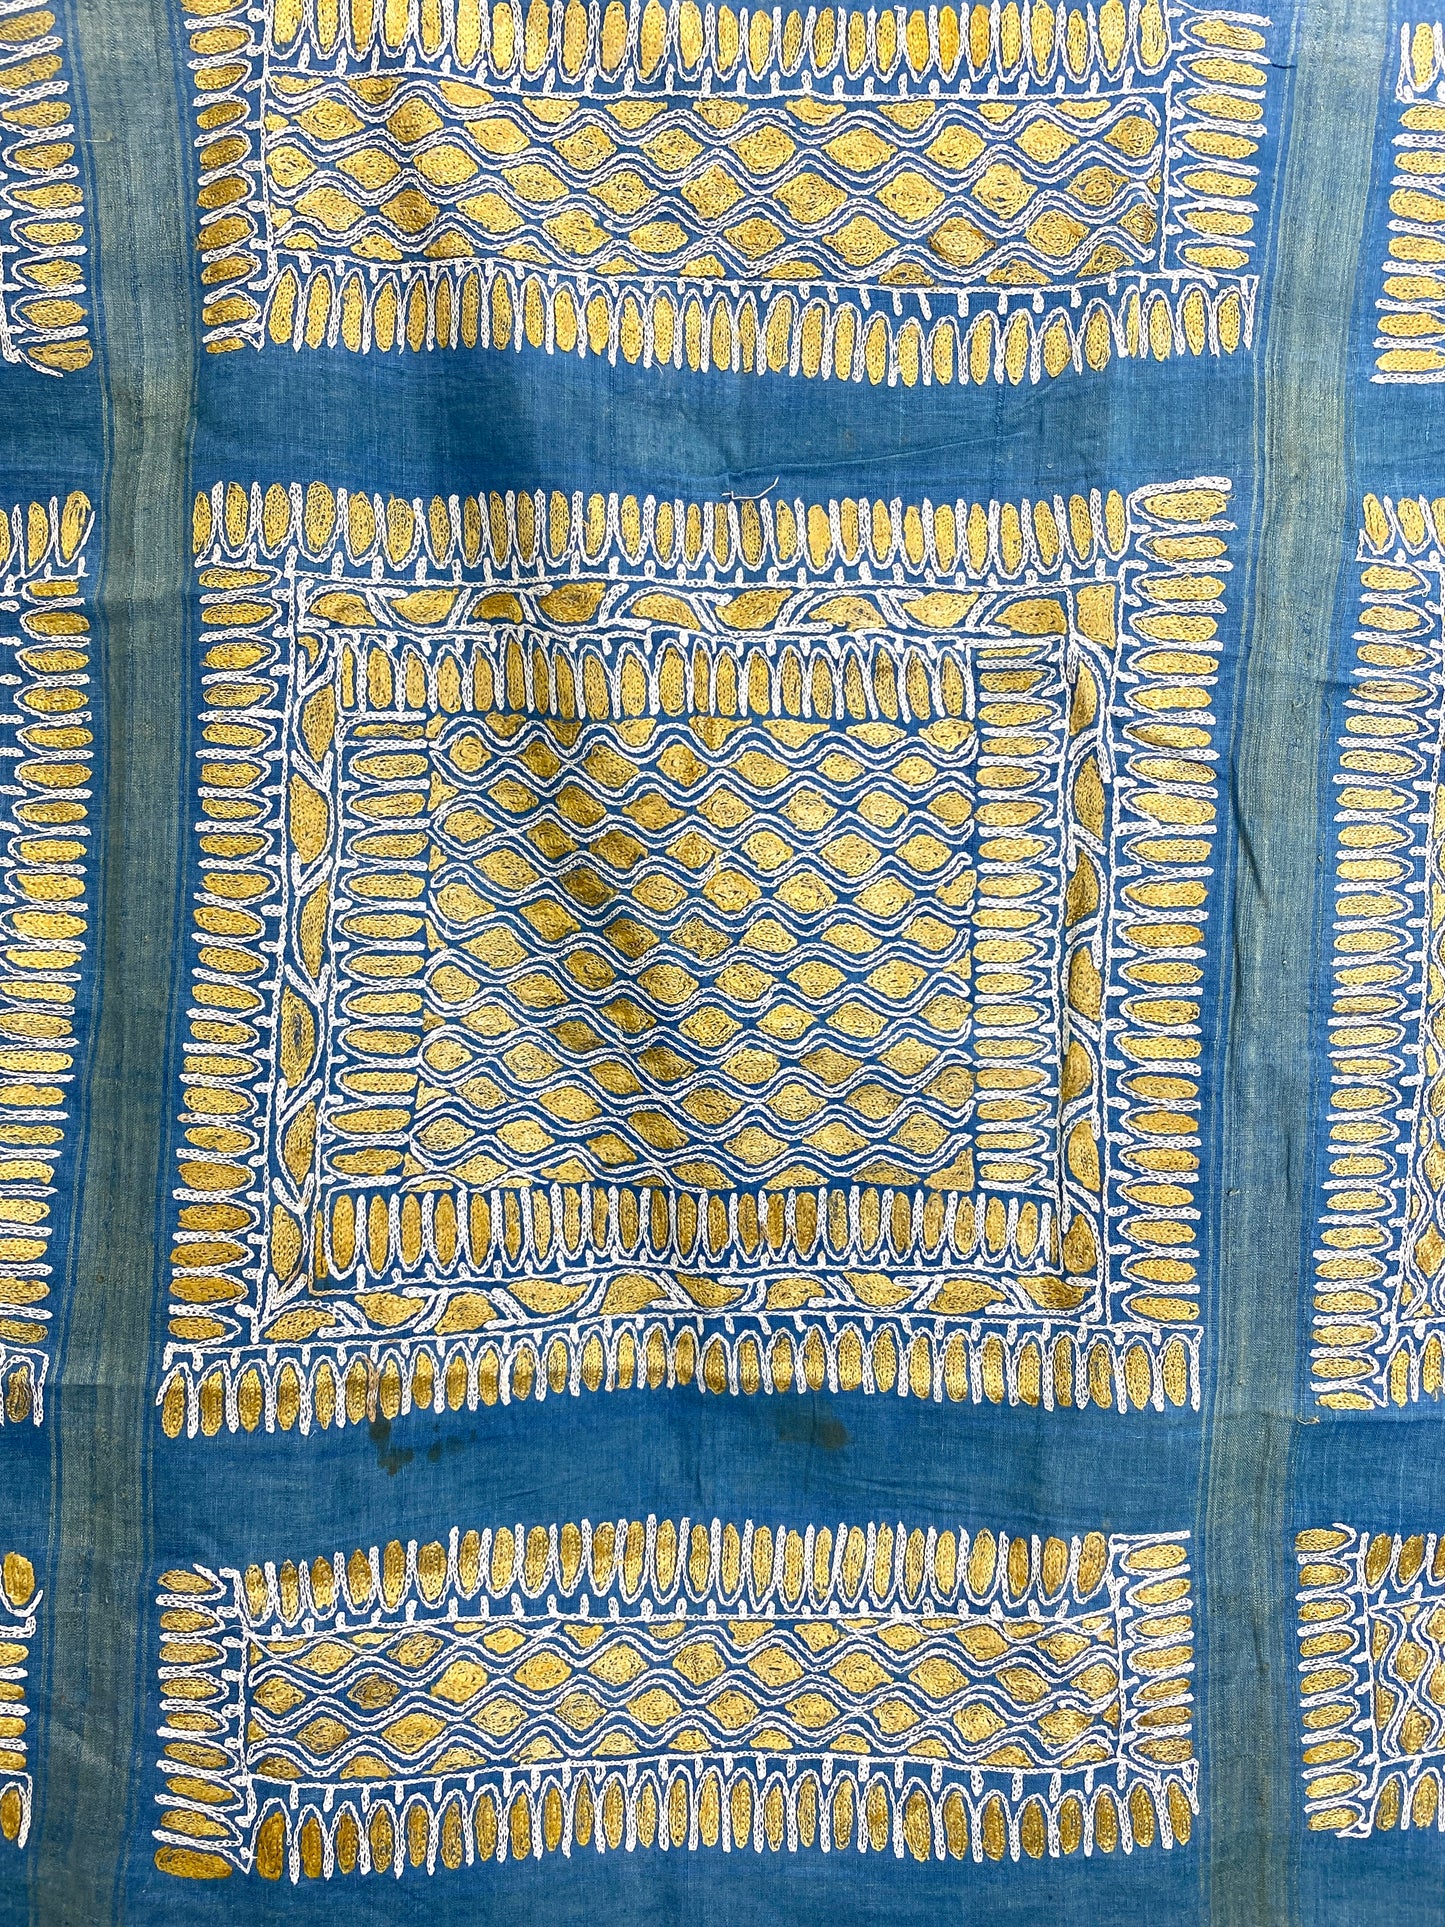 Vintage 1920s/30s Embroidered Blue Cotton Fabric Cloth, 42" Square